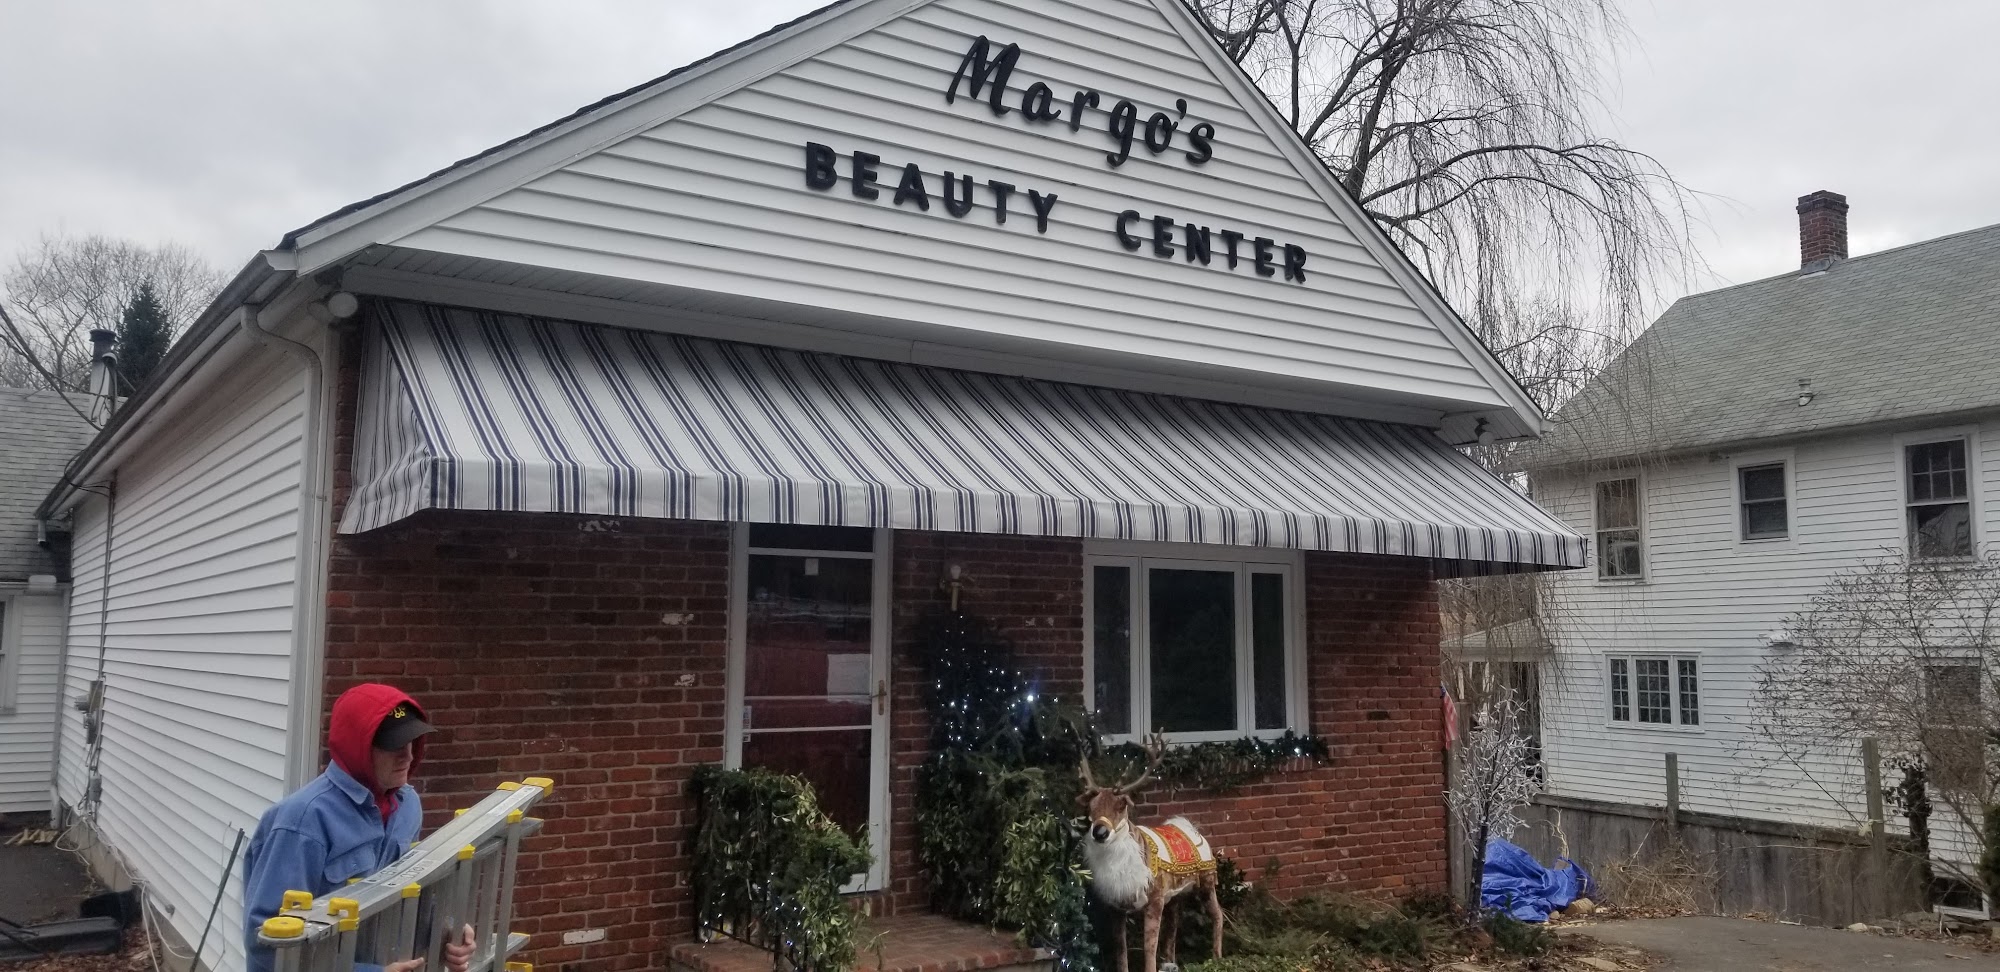 Margo's Beauty Center 91 Middlesex Turnpike, Chester Connecticut 06412